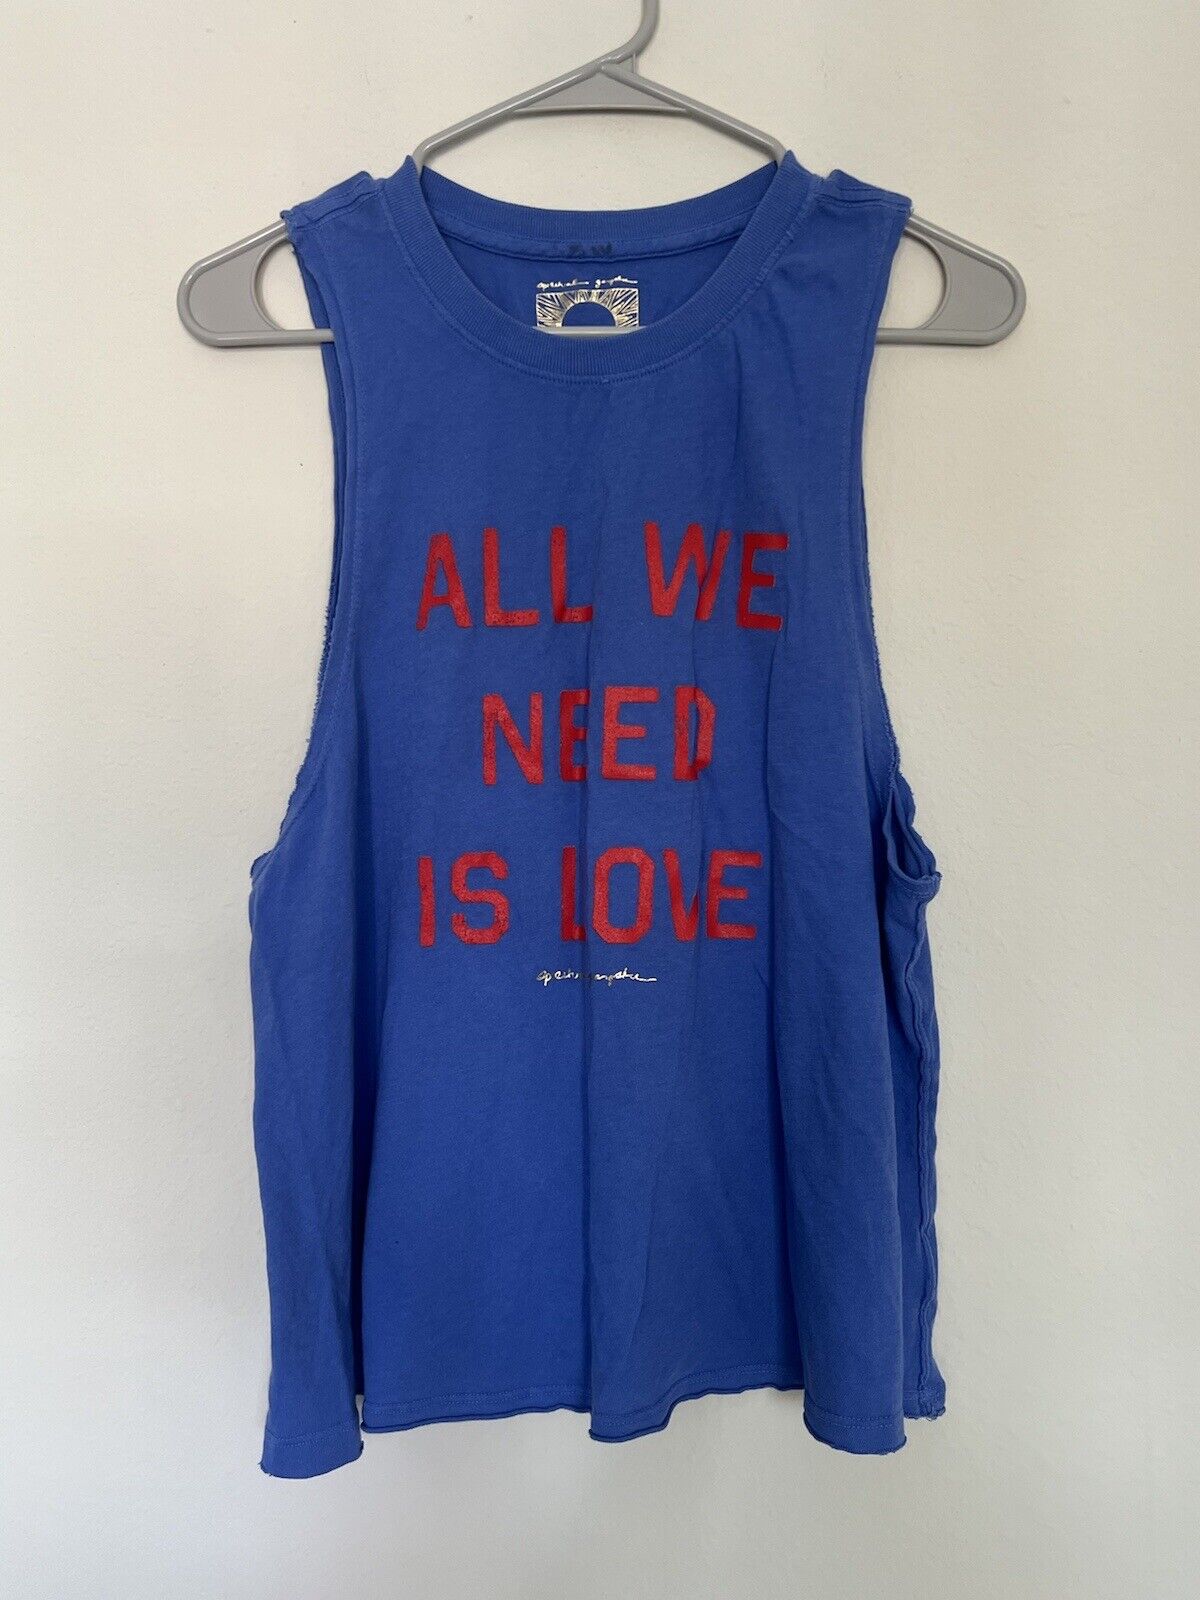 Spiritual Gangster All we need is love Cotton Blu… - image 1